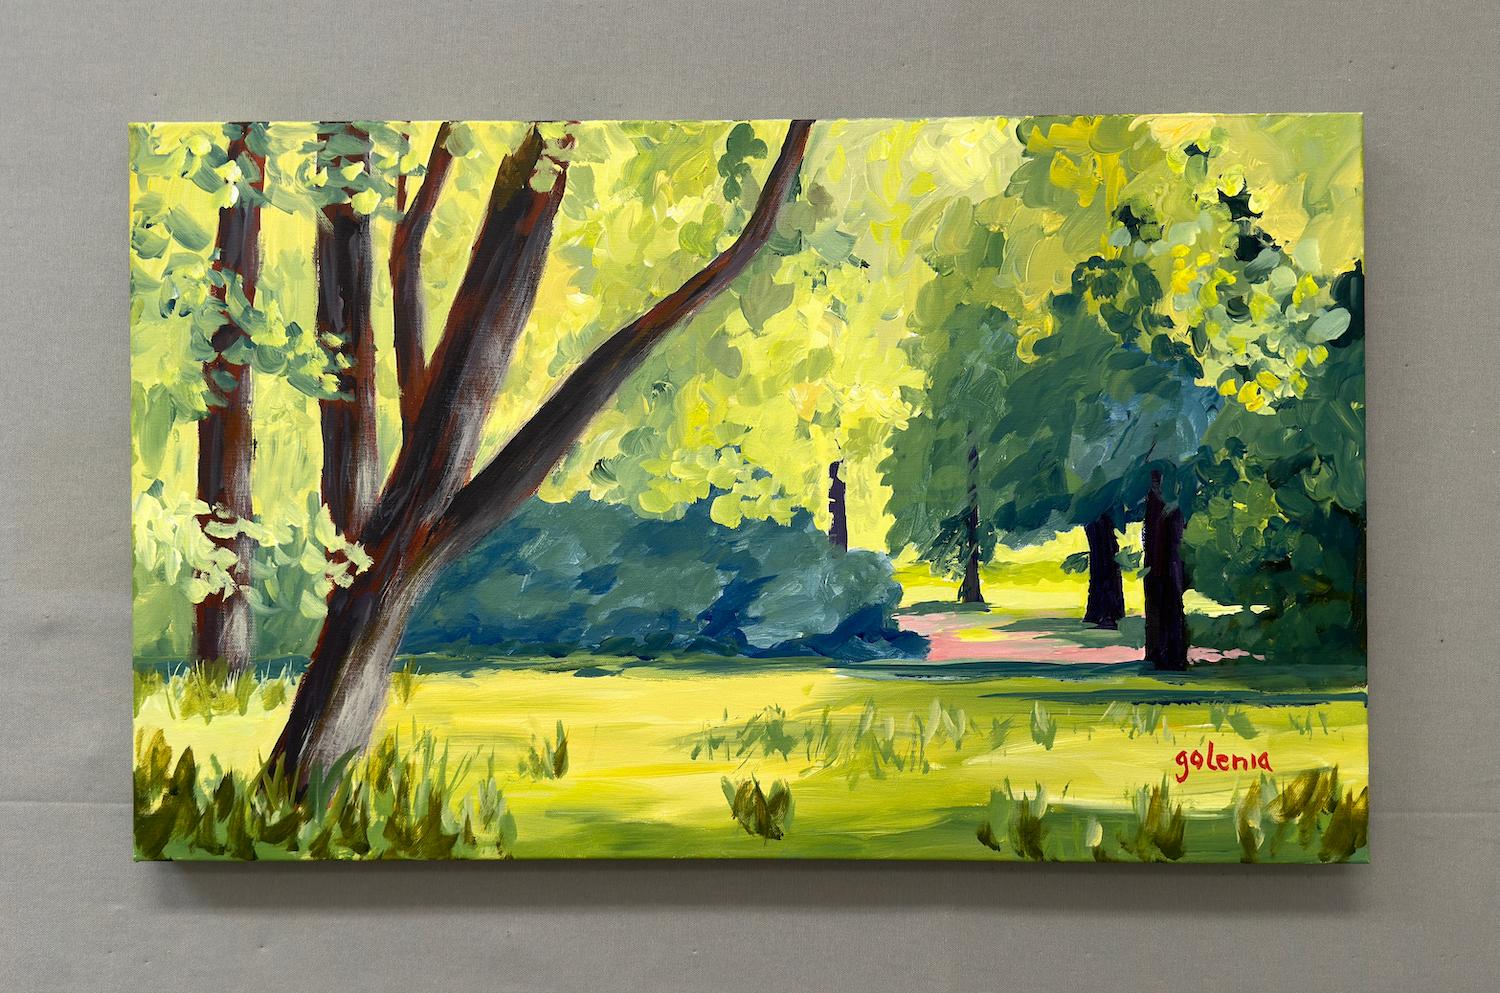 <p>Artist Comments<br>Abundant with trees, the painting offers a visual sanctuary. The blend of warm yellow greens and cooler blue greens evokes feelings of freshness that calm the eye. Soft brushstrokes mimic the gentle rustling of leaves in a